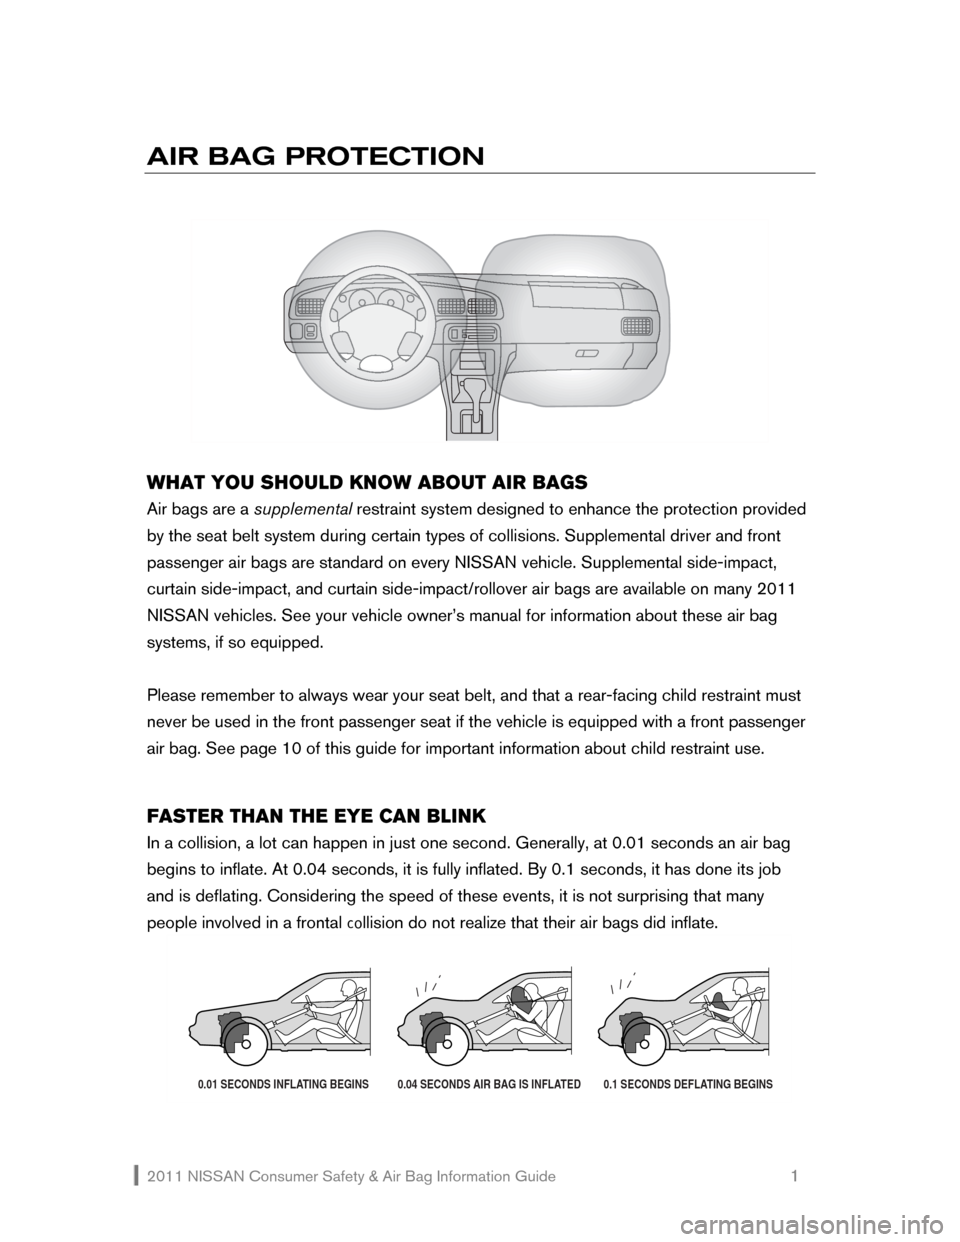 NISSAN CUBE 2011 3.G Consumer Safety Air Bag Information Guide 2011 NISSAN Consumer Safety & Air Bag Information Guide                                                       1 
AIR BAG PROTECTION 
    
 
 
WHAT YOU SHOULD KNOW ABOUT AIR BAGS 
Air bags are a supple